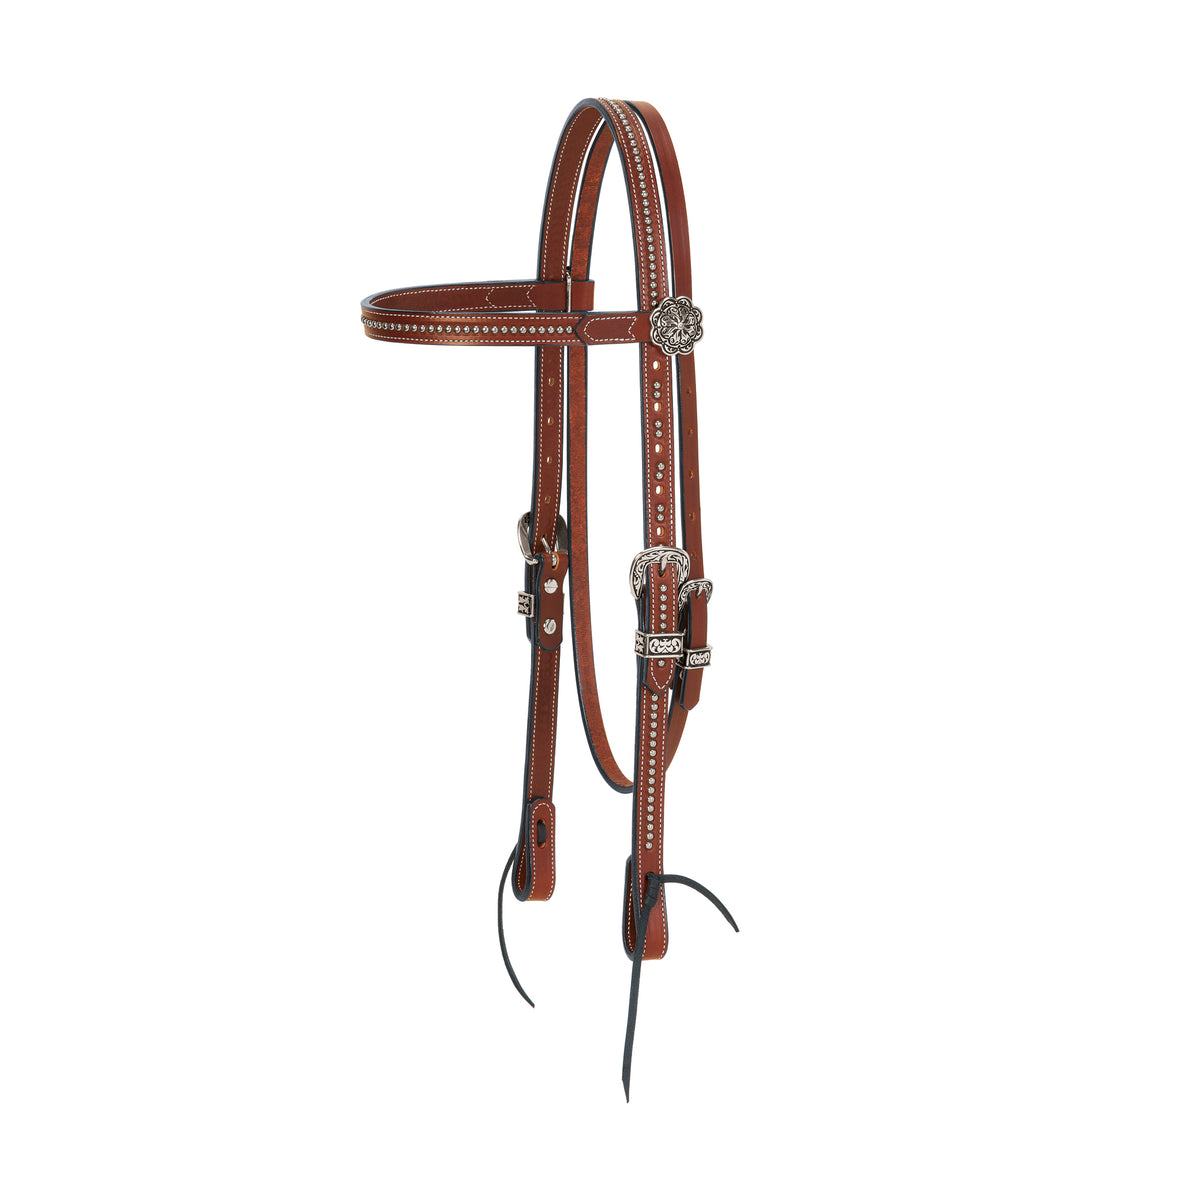 Austin Browband Headstall - Weaver Leather Equine